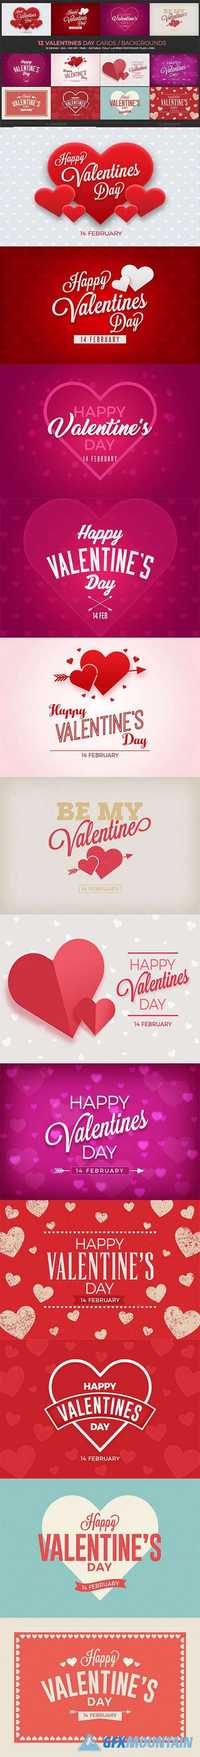  12 Valentines Day Cards/Backgrounds  1140821 